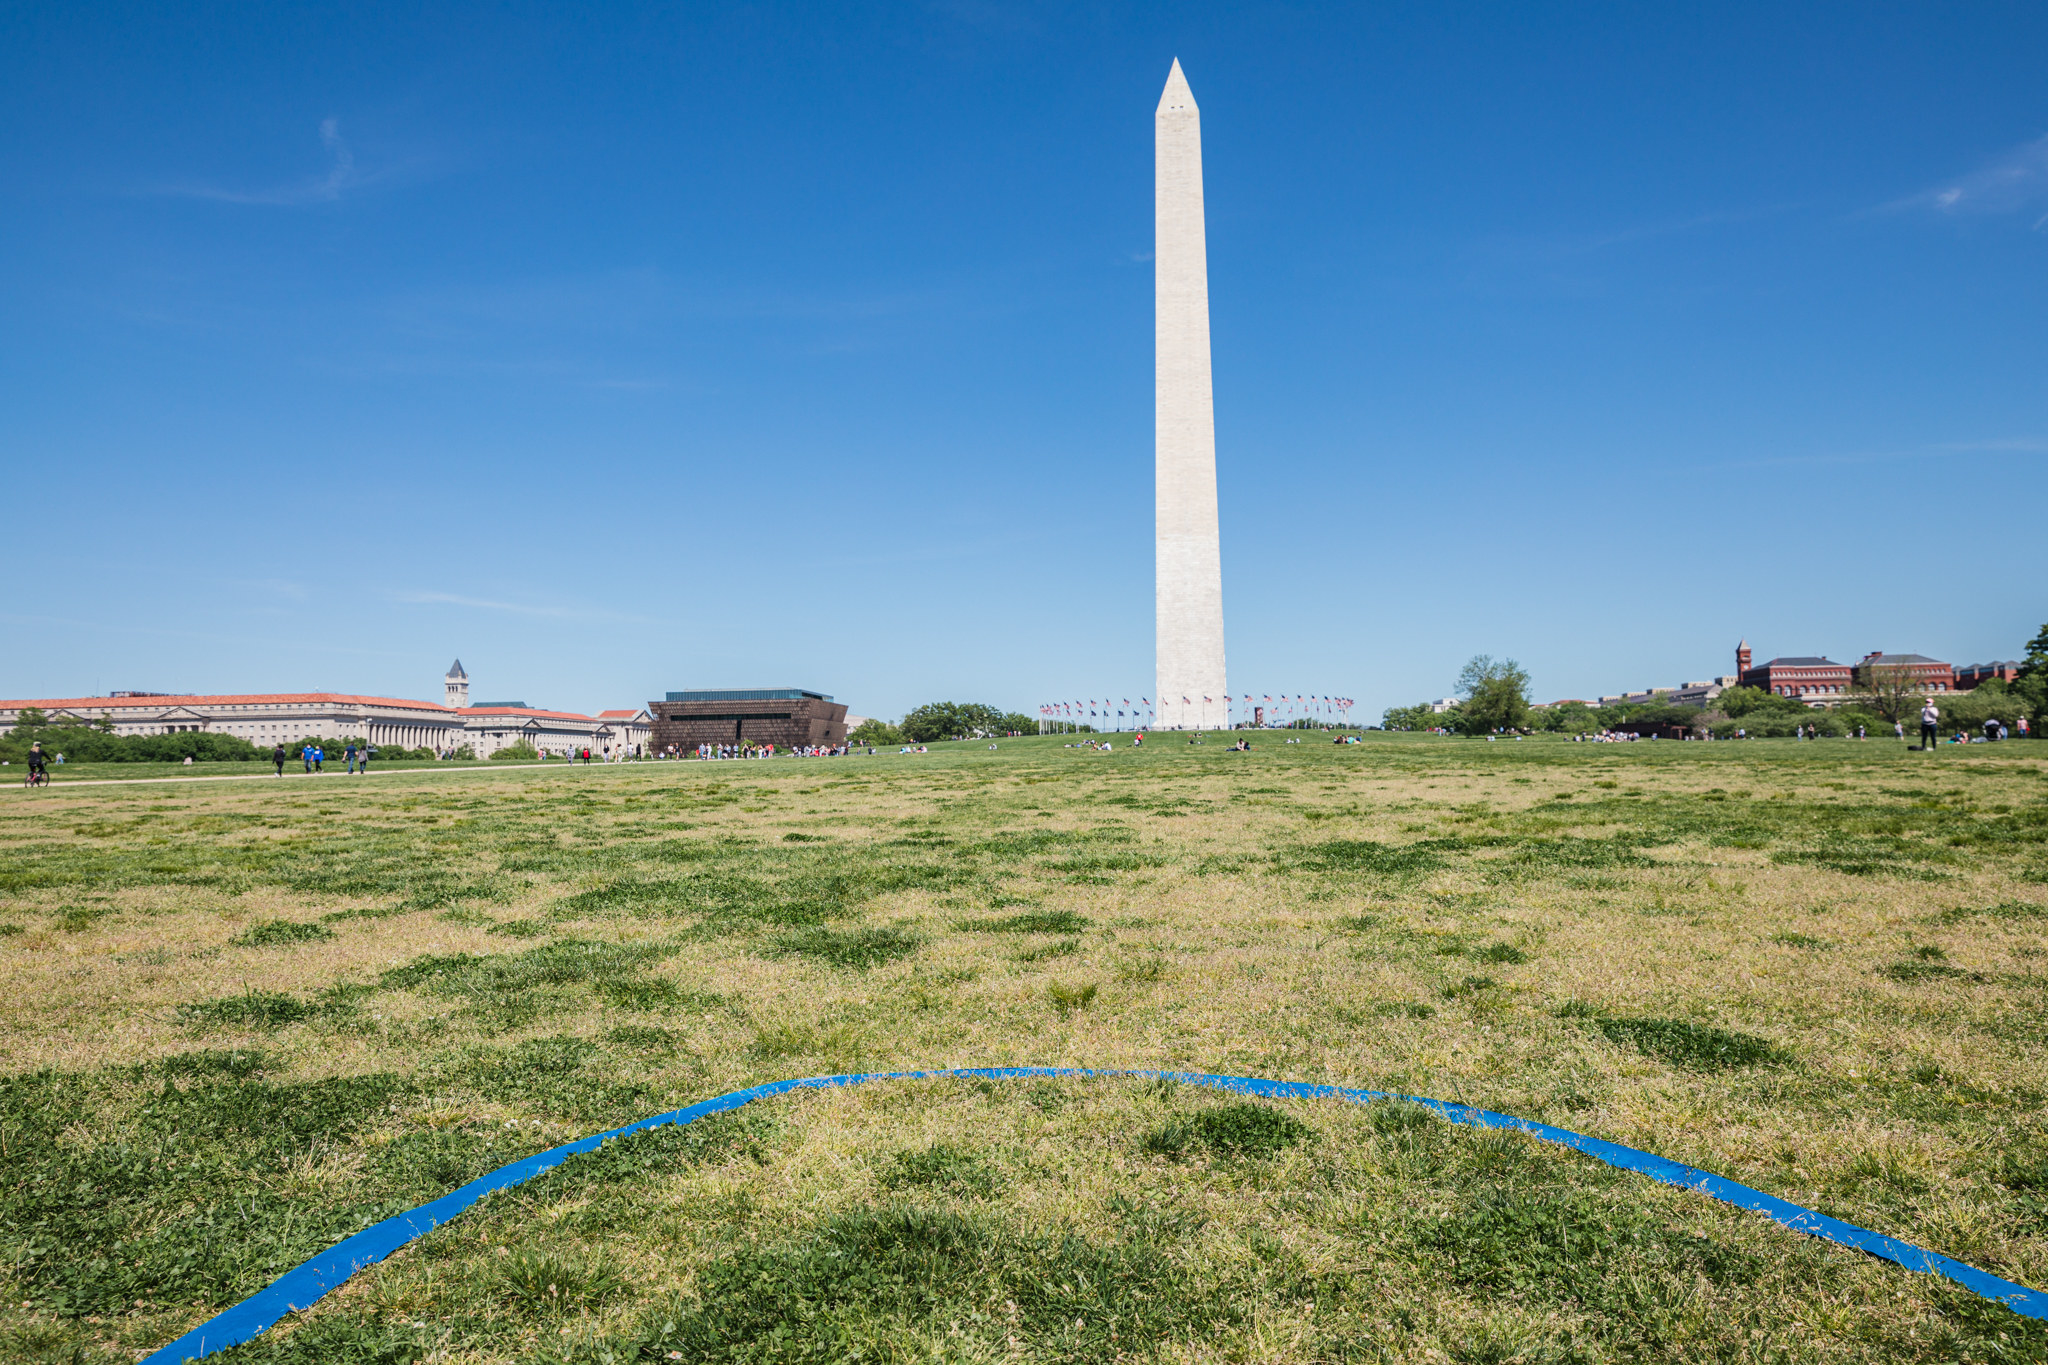 The Washington Monument in the distance, with a blue tape on its nearby grass